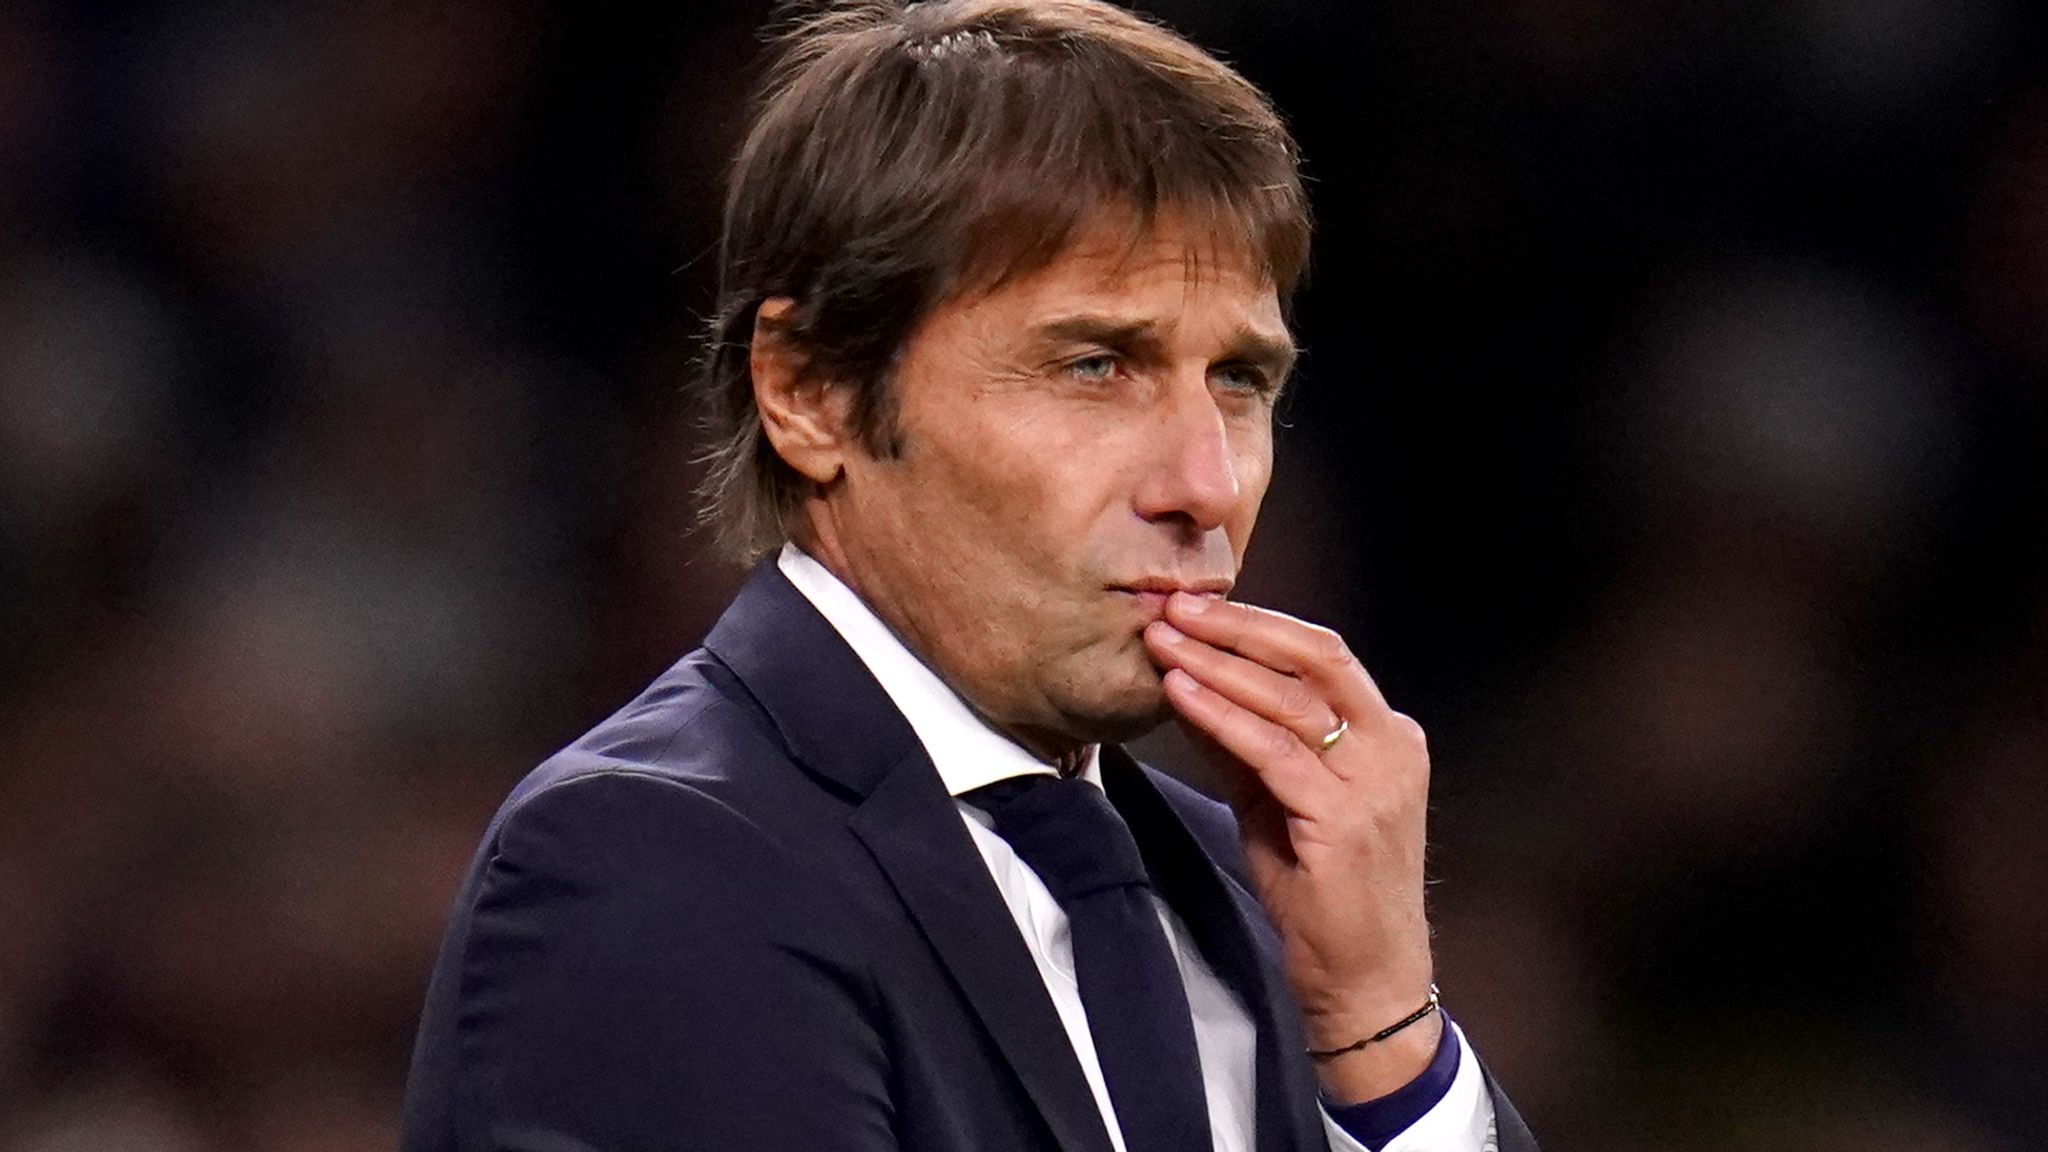 Antonio Conte says he will discuss Tottenham future at end of season with club needing 'good vision' | Football News | Sky Sports